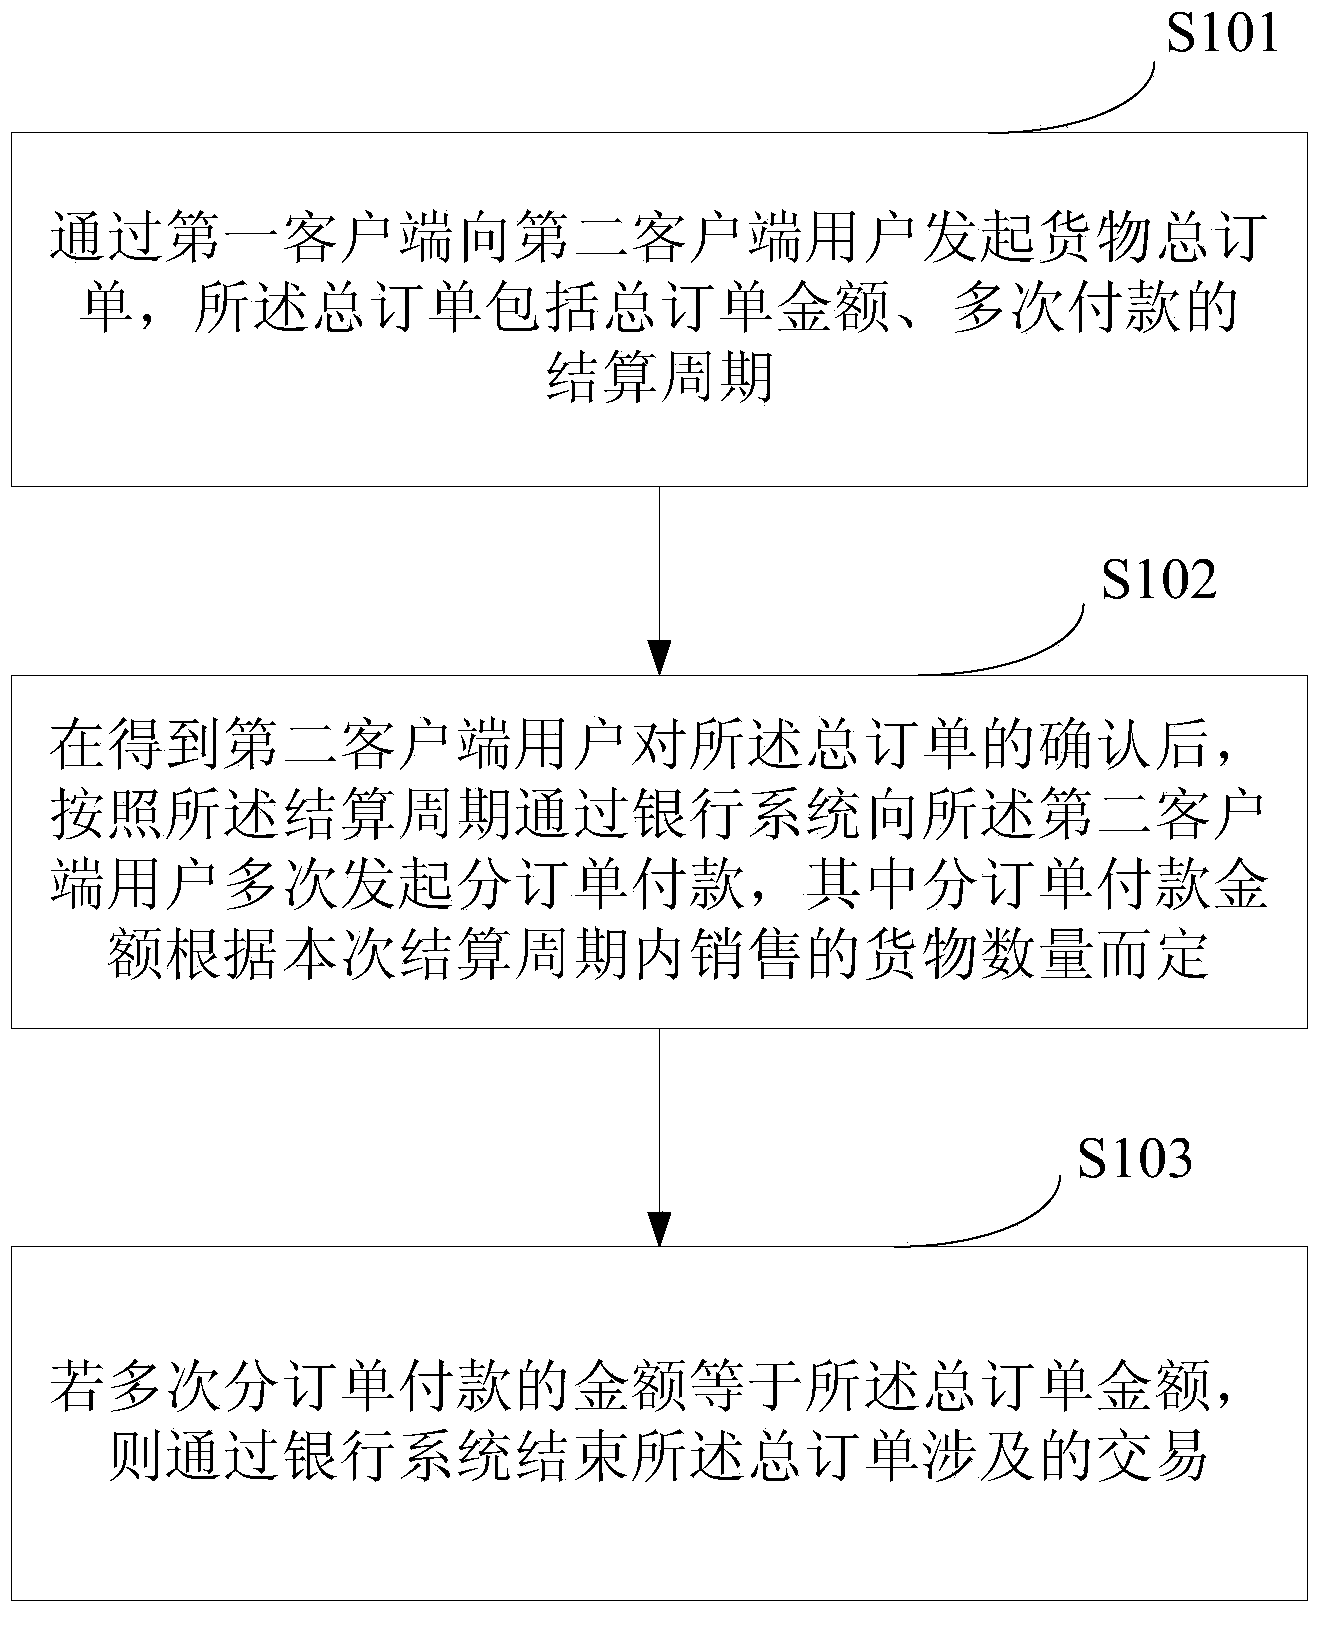 Method and device for processing settlement information